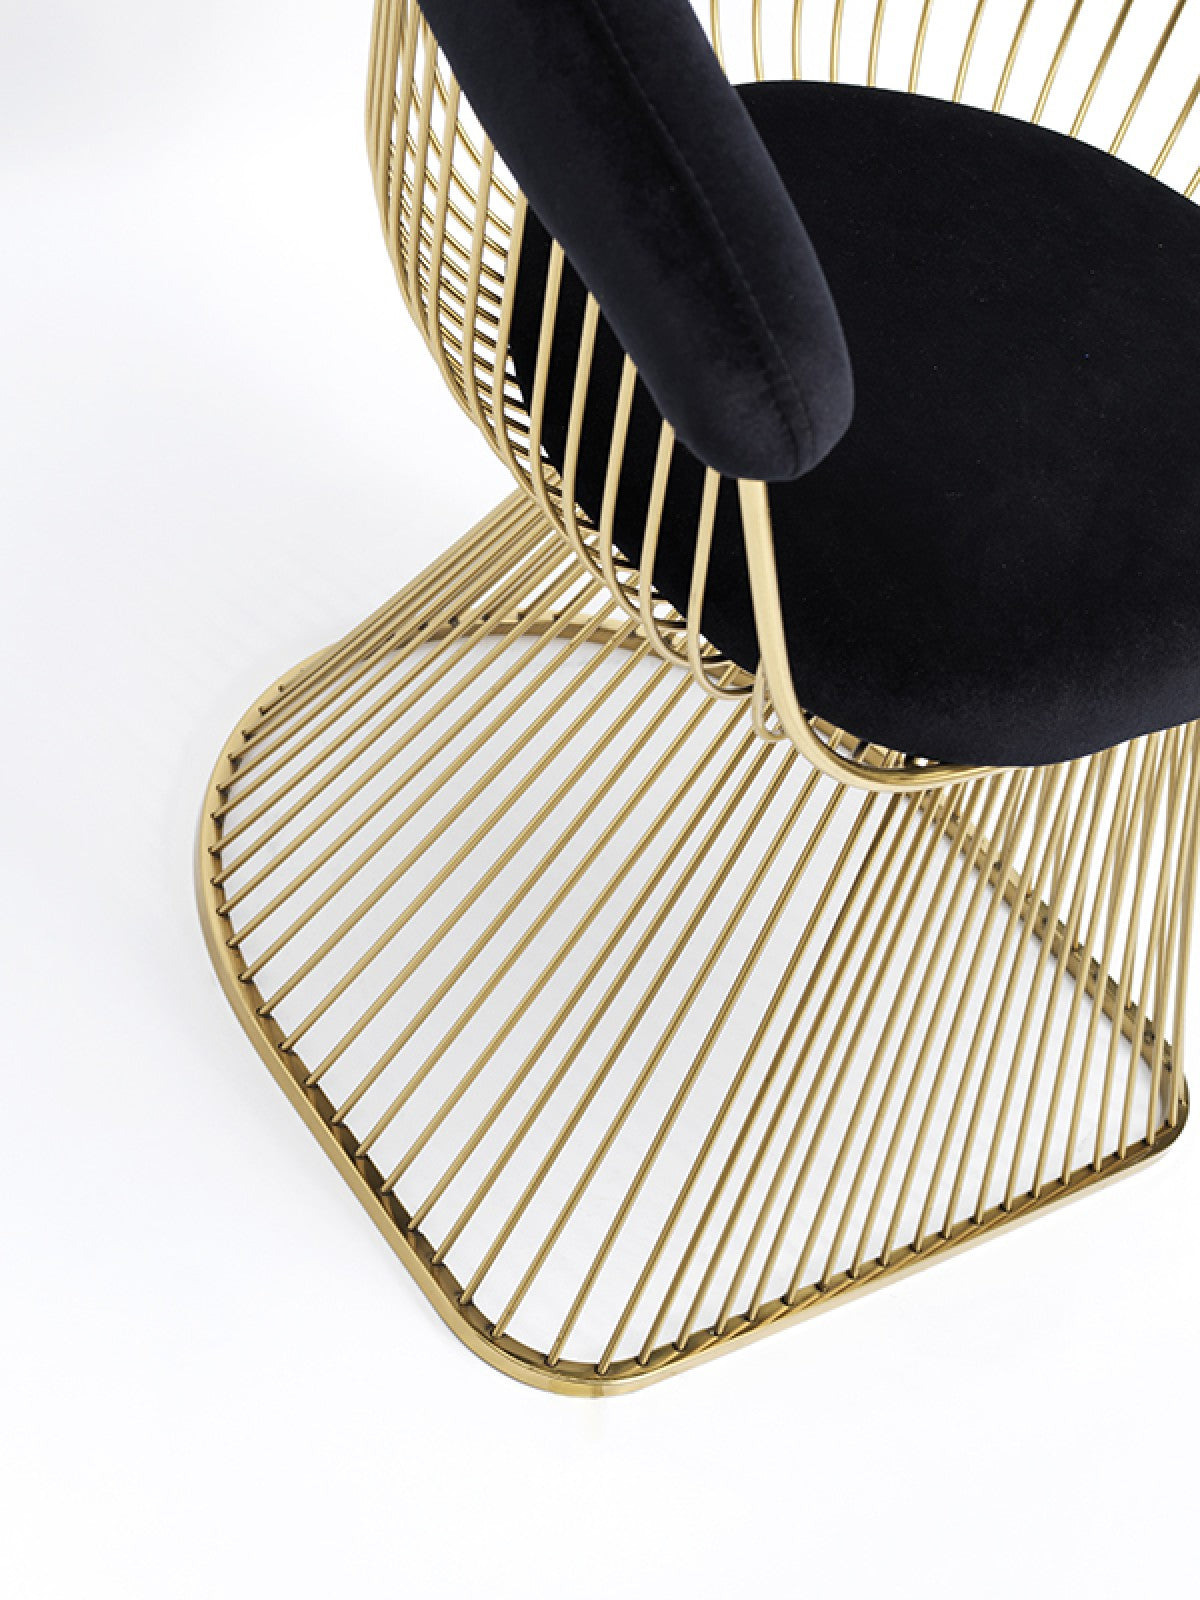 Swell Platner Gold Dining Chair Arm Chair